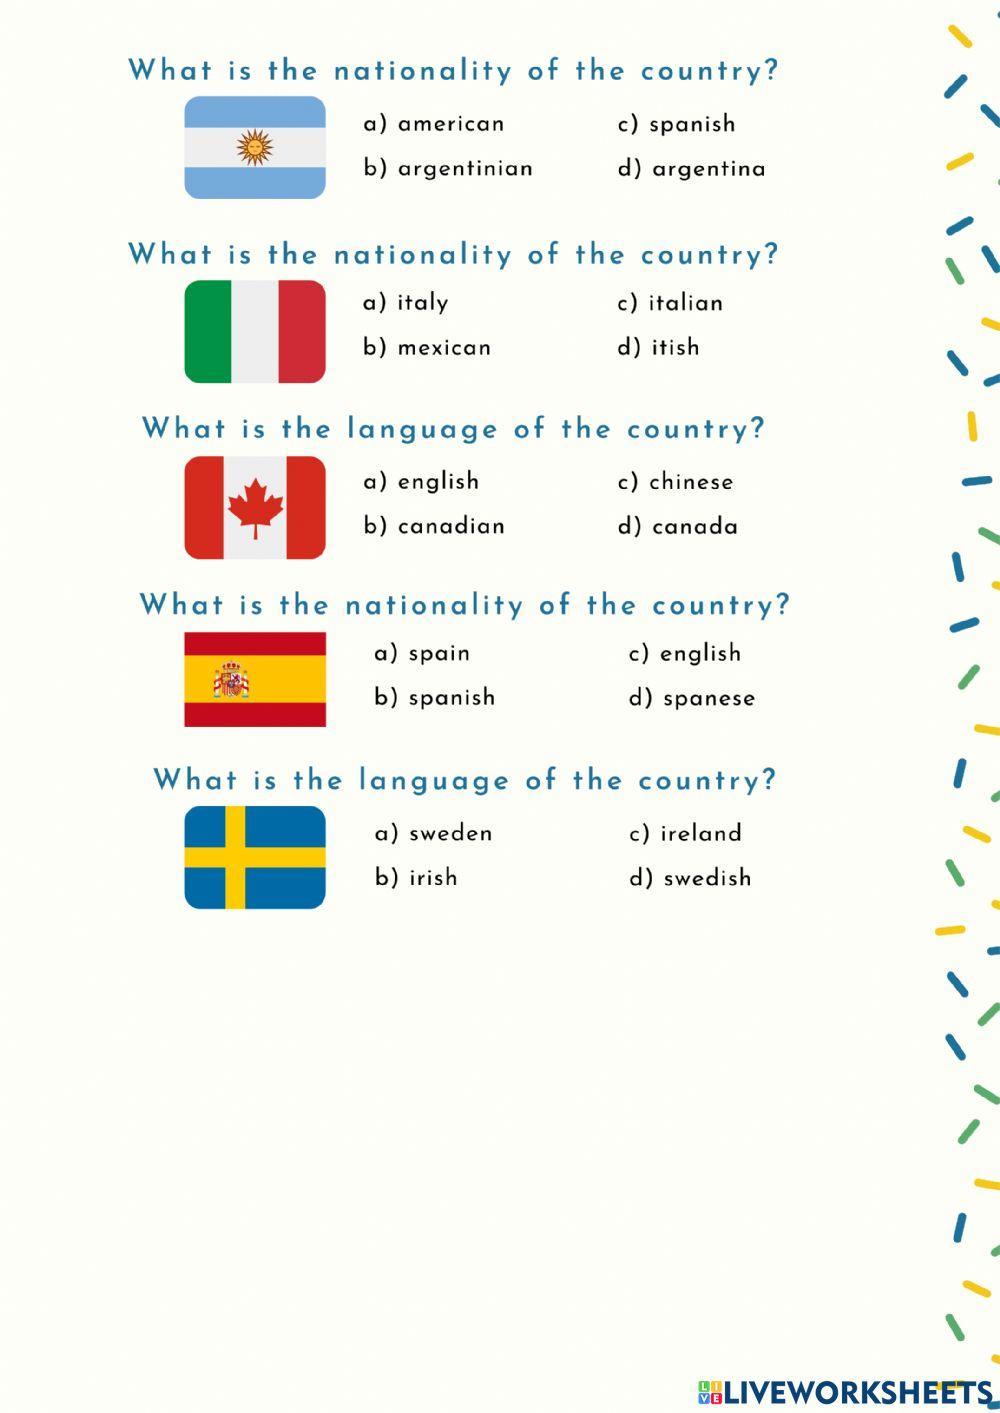 Nationalities and languages